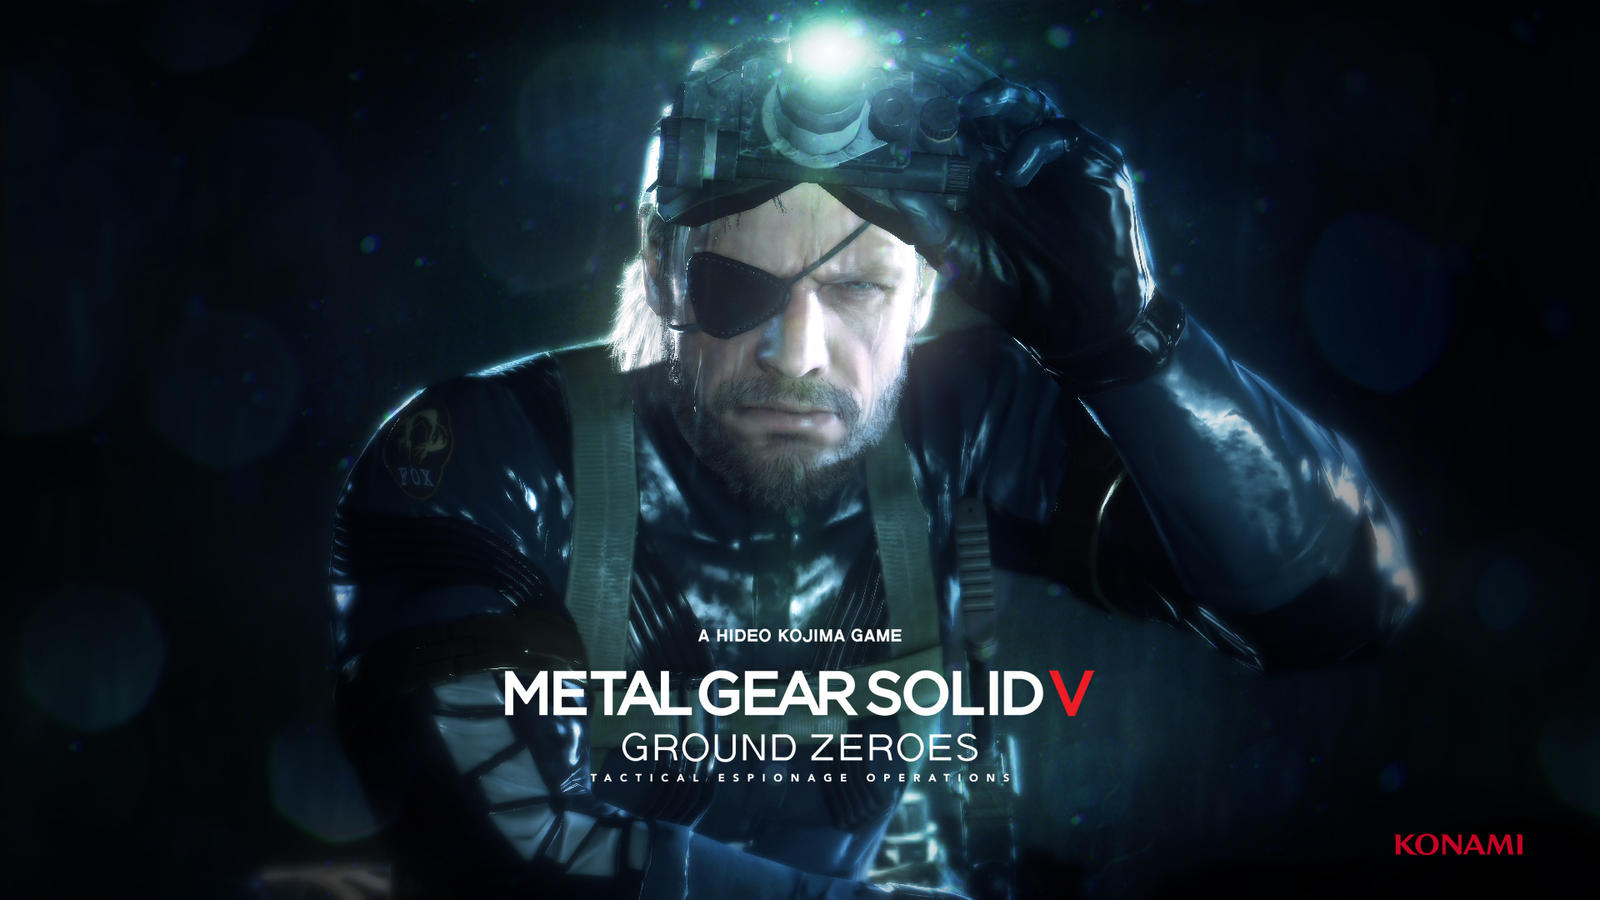 Steam Community :: Guide :: 100% Achievement Guide: MGS5 - Ground